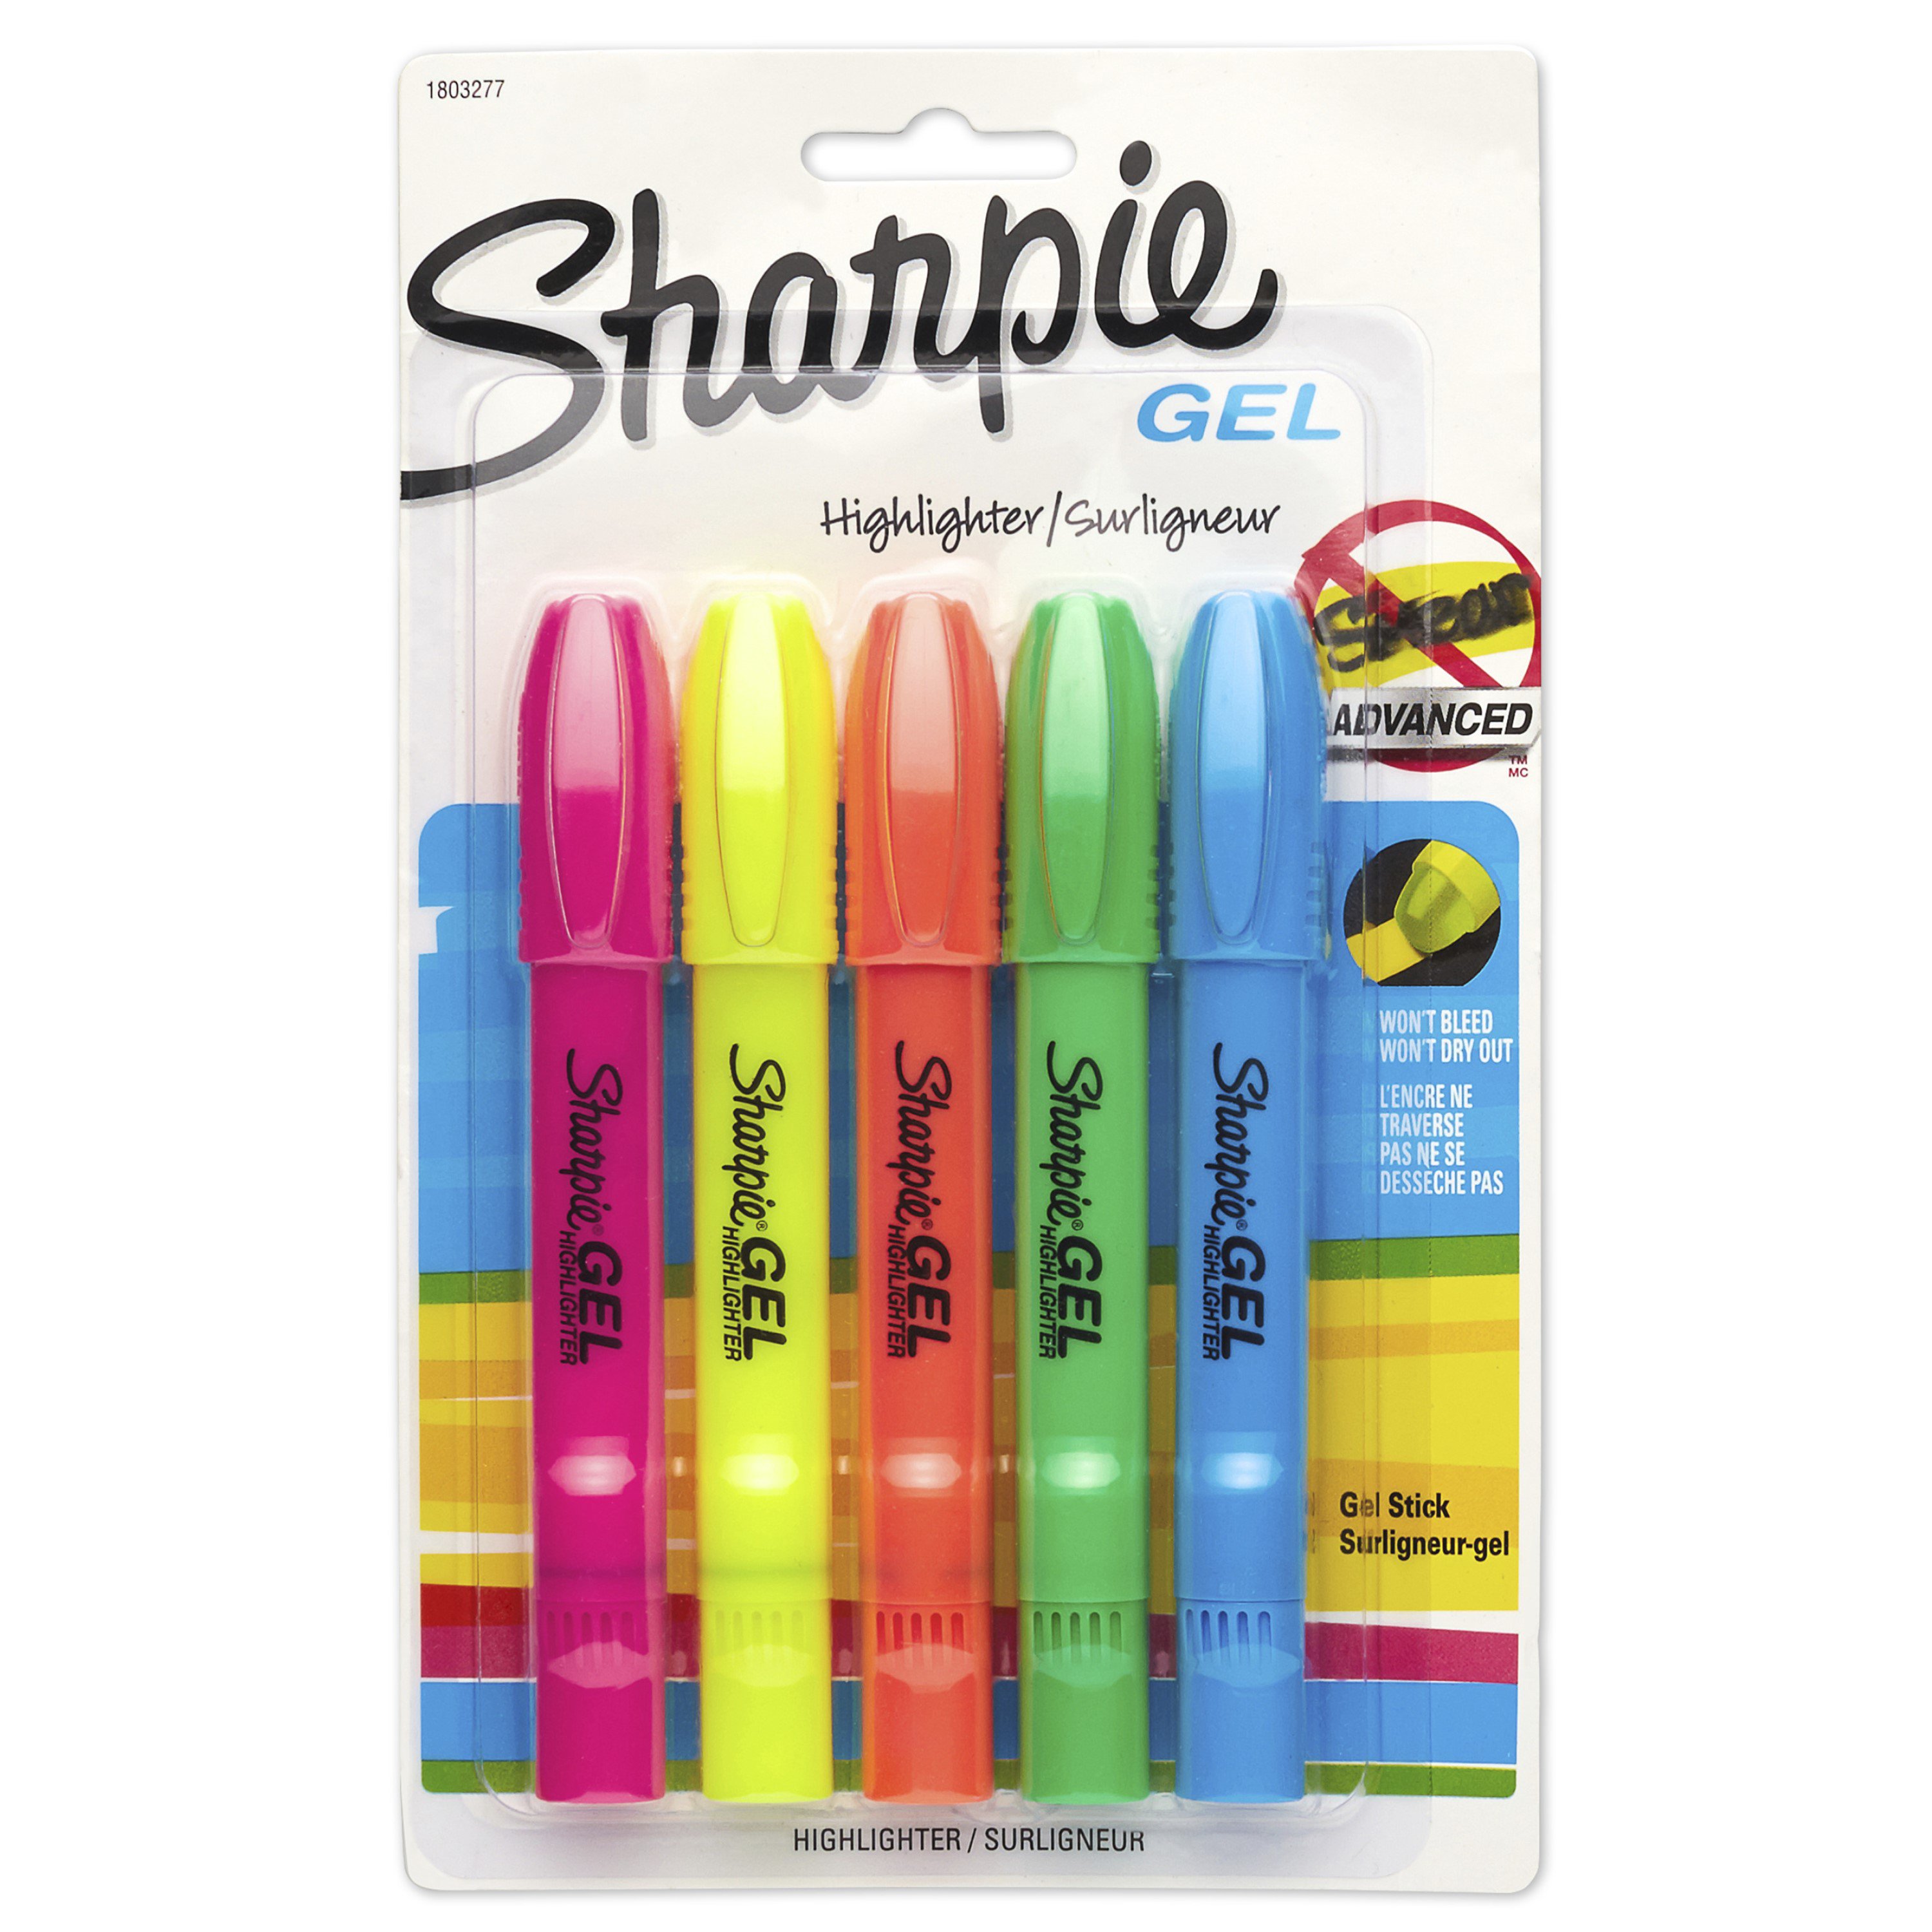 6 Best Highlighters for Students - Our Top Choices